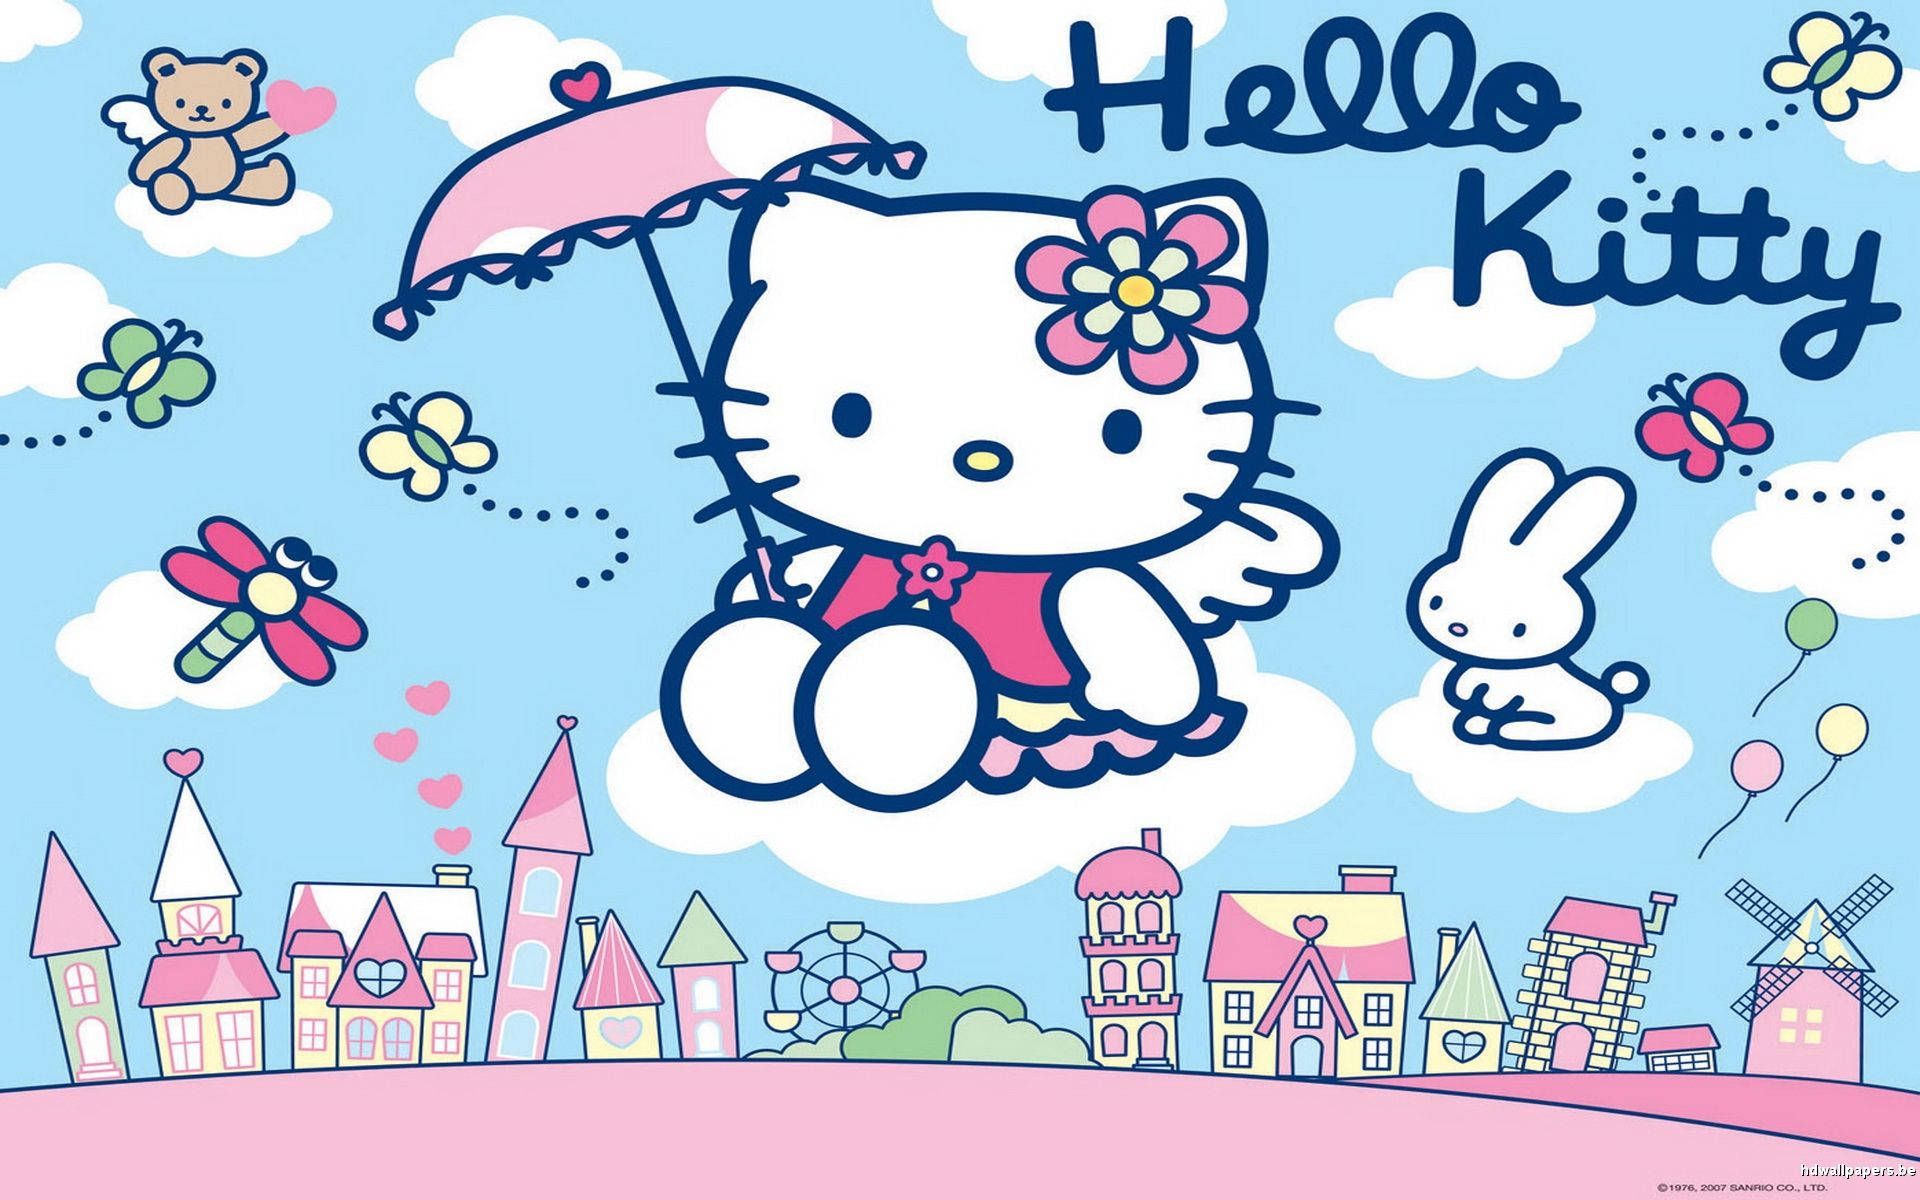 A hello kitty wallpaper with various characters - Hello Kitty